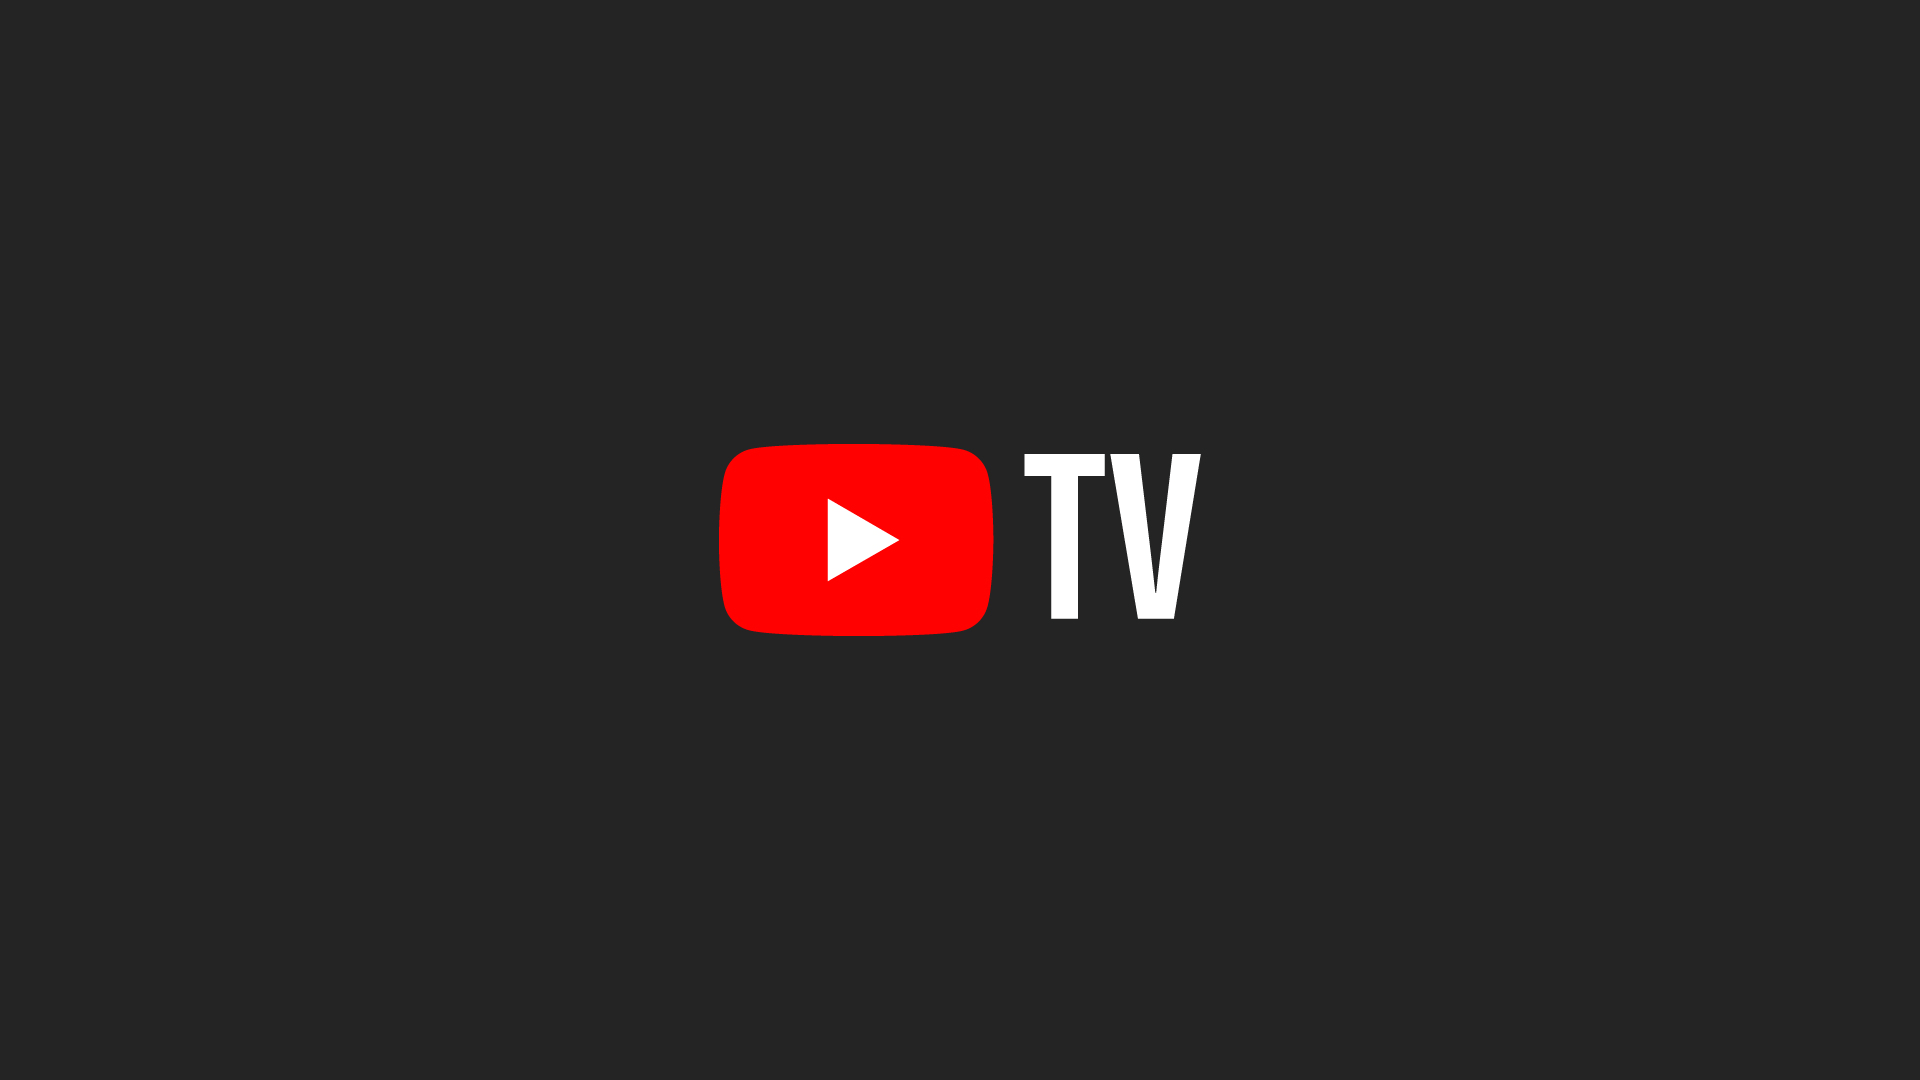 YouTube TV & Scripps Announce a Deal to Add More Networks